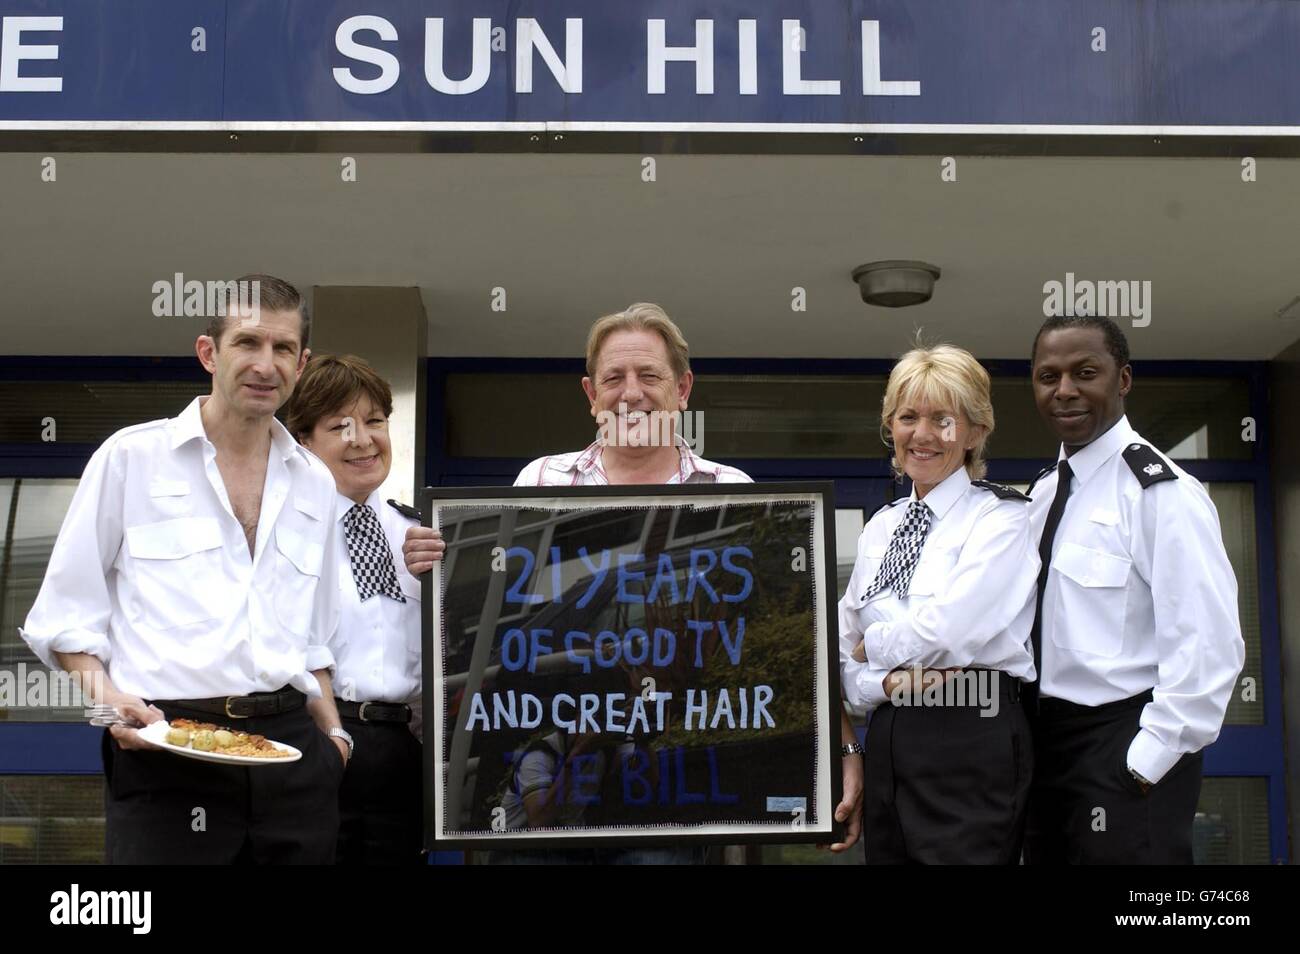 The Bill actors, from left to right; Jeff Stewart, Roberta Taylor, Mark Wingett, Trudie Goodwin and Cyril Nri pose with an artwork given to the ITV show by artist Tracey Emin to celebrate the police drama's 21st anniversary at their studio in south London. Stock Photo